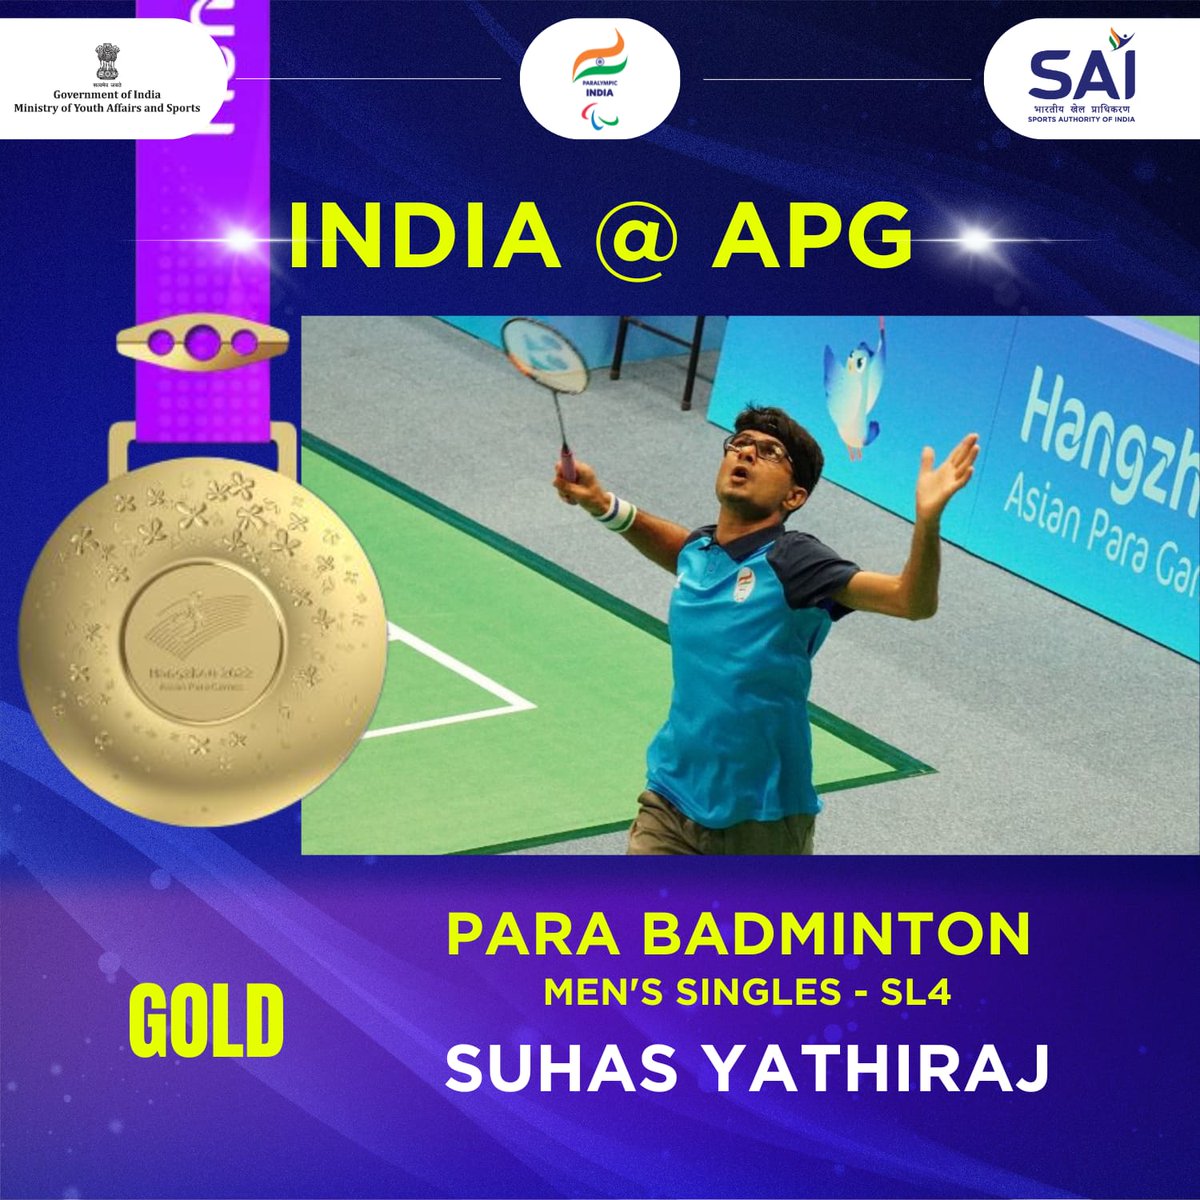 🥇 Golden Glory for 🇮🇳 at #AsianParaGames! Huge congrats to 🏸 Suhas Yathiraj, #IAS @suhas_ly, the unstoppable force in Badminton, claiming his third Gold in Men's Singles SL-4 with a thrilling 2-1 win over Malaysia's Mohd Amin. An incredible victory! 🌟 #Cheer4India #Praise4Para